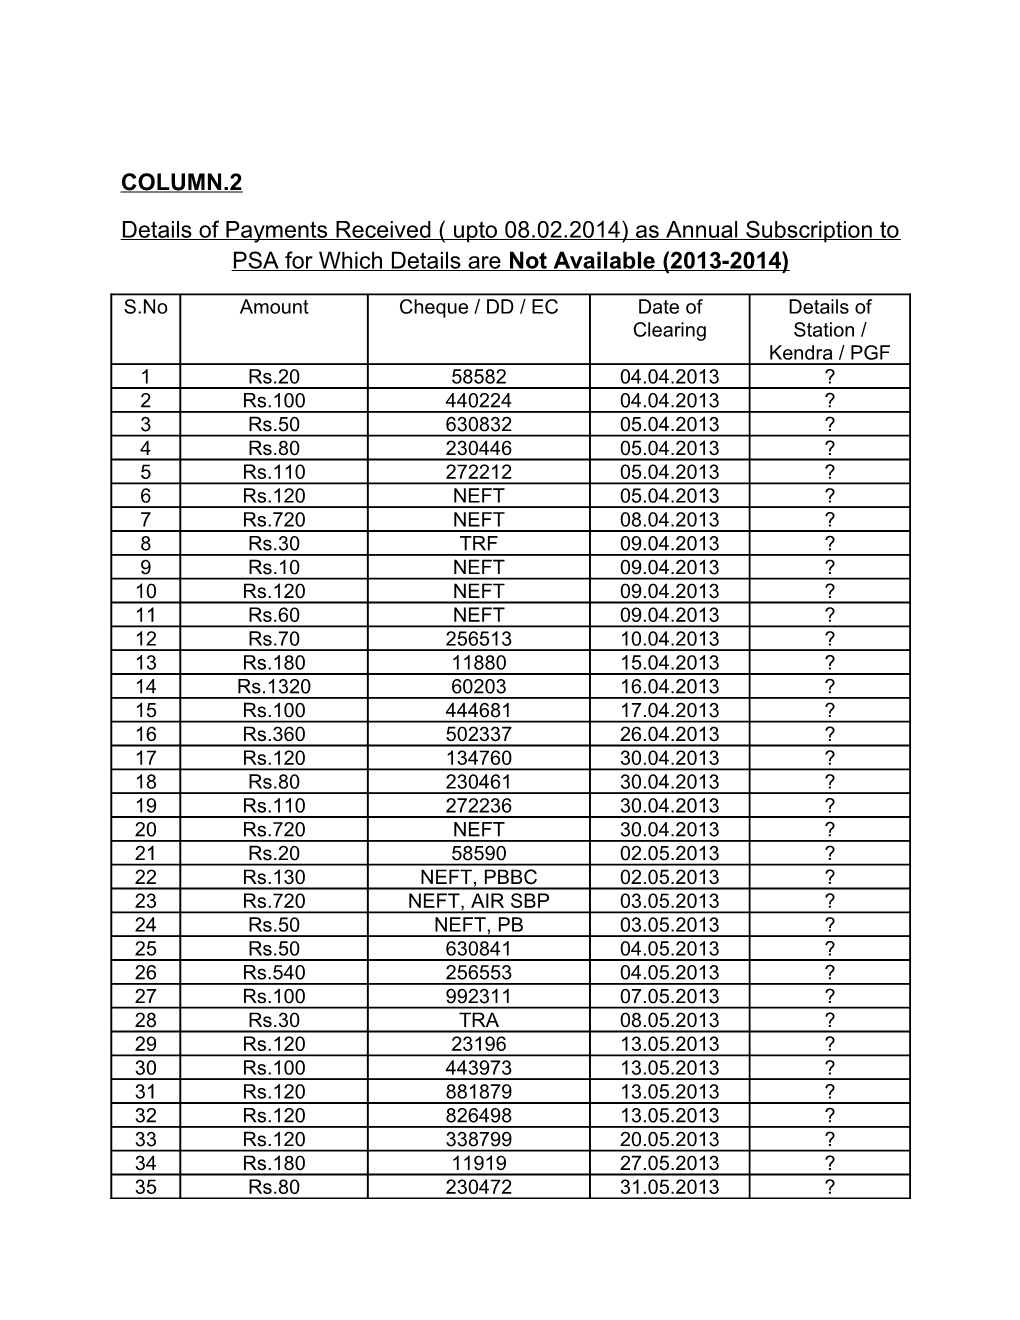 Details of Payments Received (Upto 08.02.2013) As Annual Subscription to PSA for Which